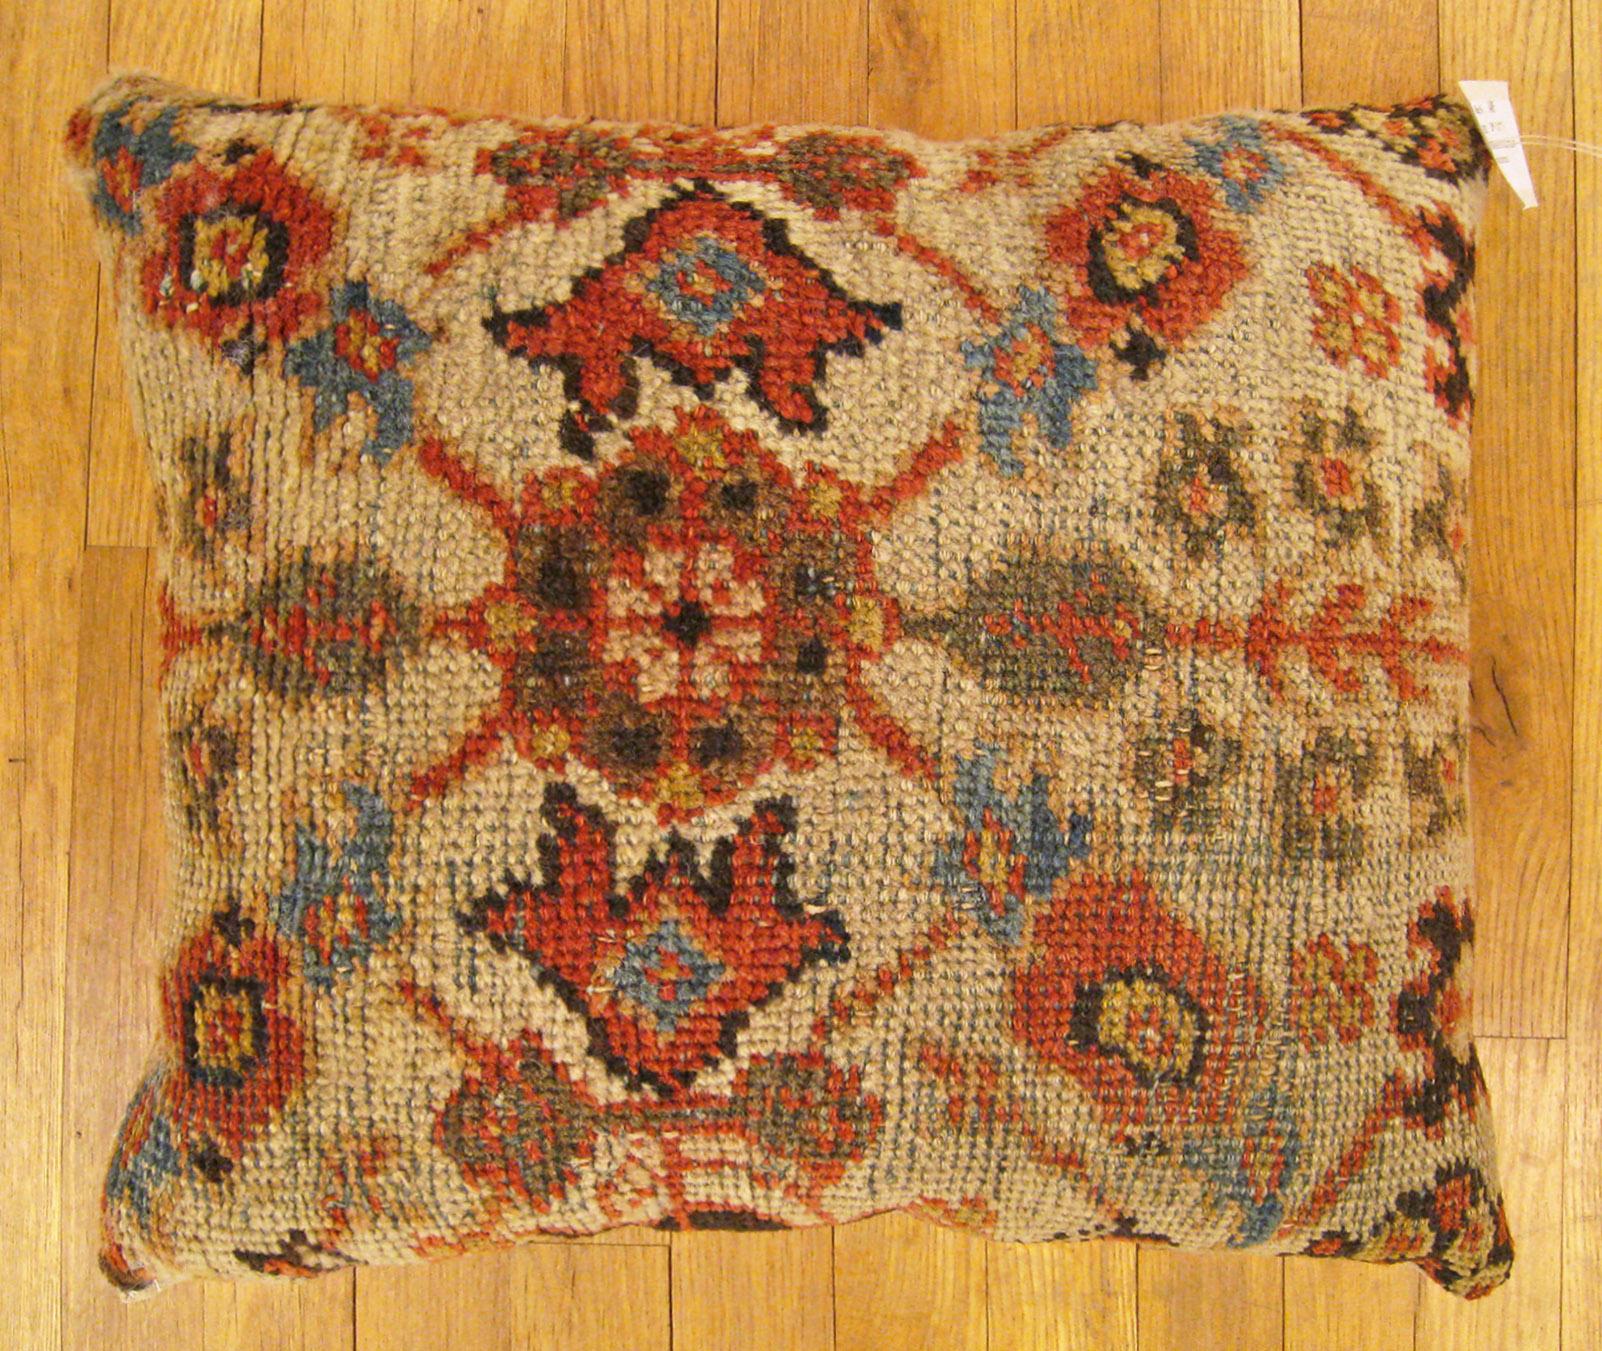 Antique Persian Sultanabad Pillow; size 1'8” x 1'5”.

An antique decorative pillow with floral elments and geometric abstracts, size 1'8” x 1'5”. This lovely decorative pillow features an antique fabric of a Hamadan rug on front which is